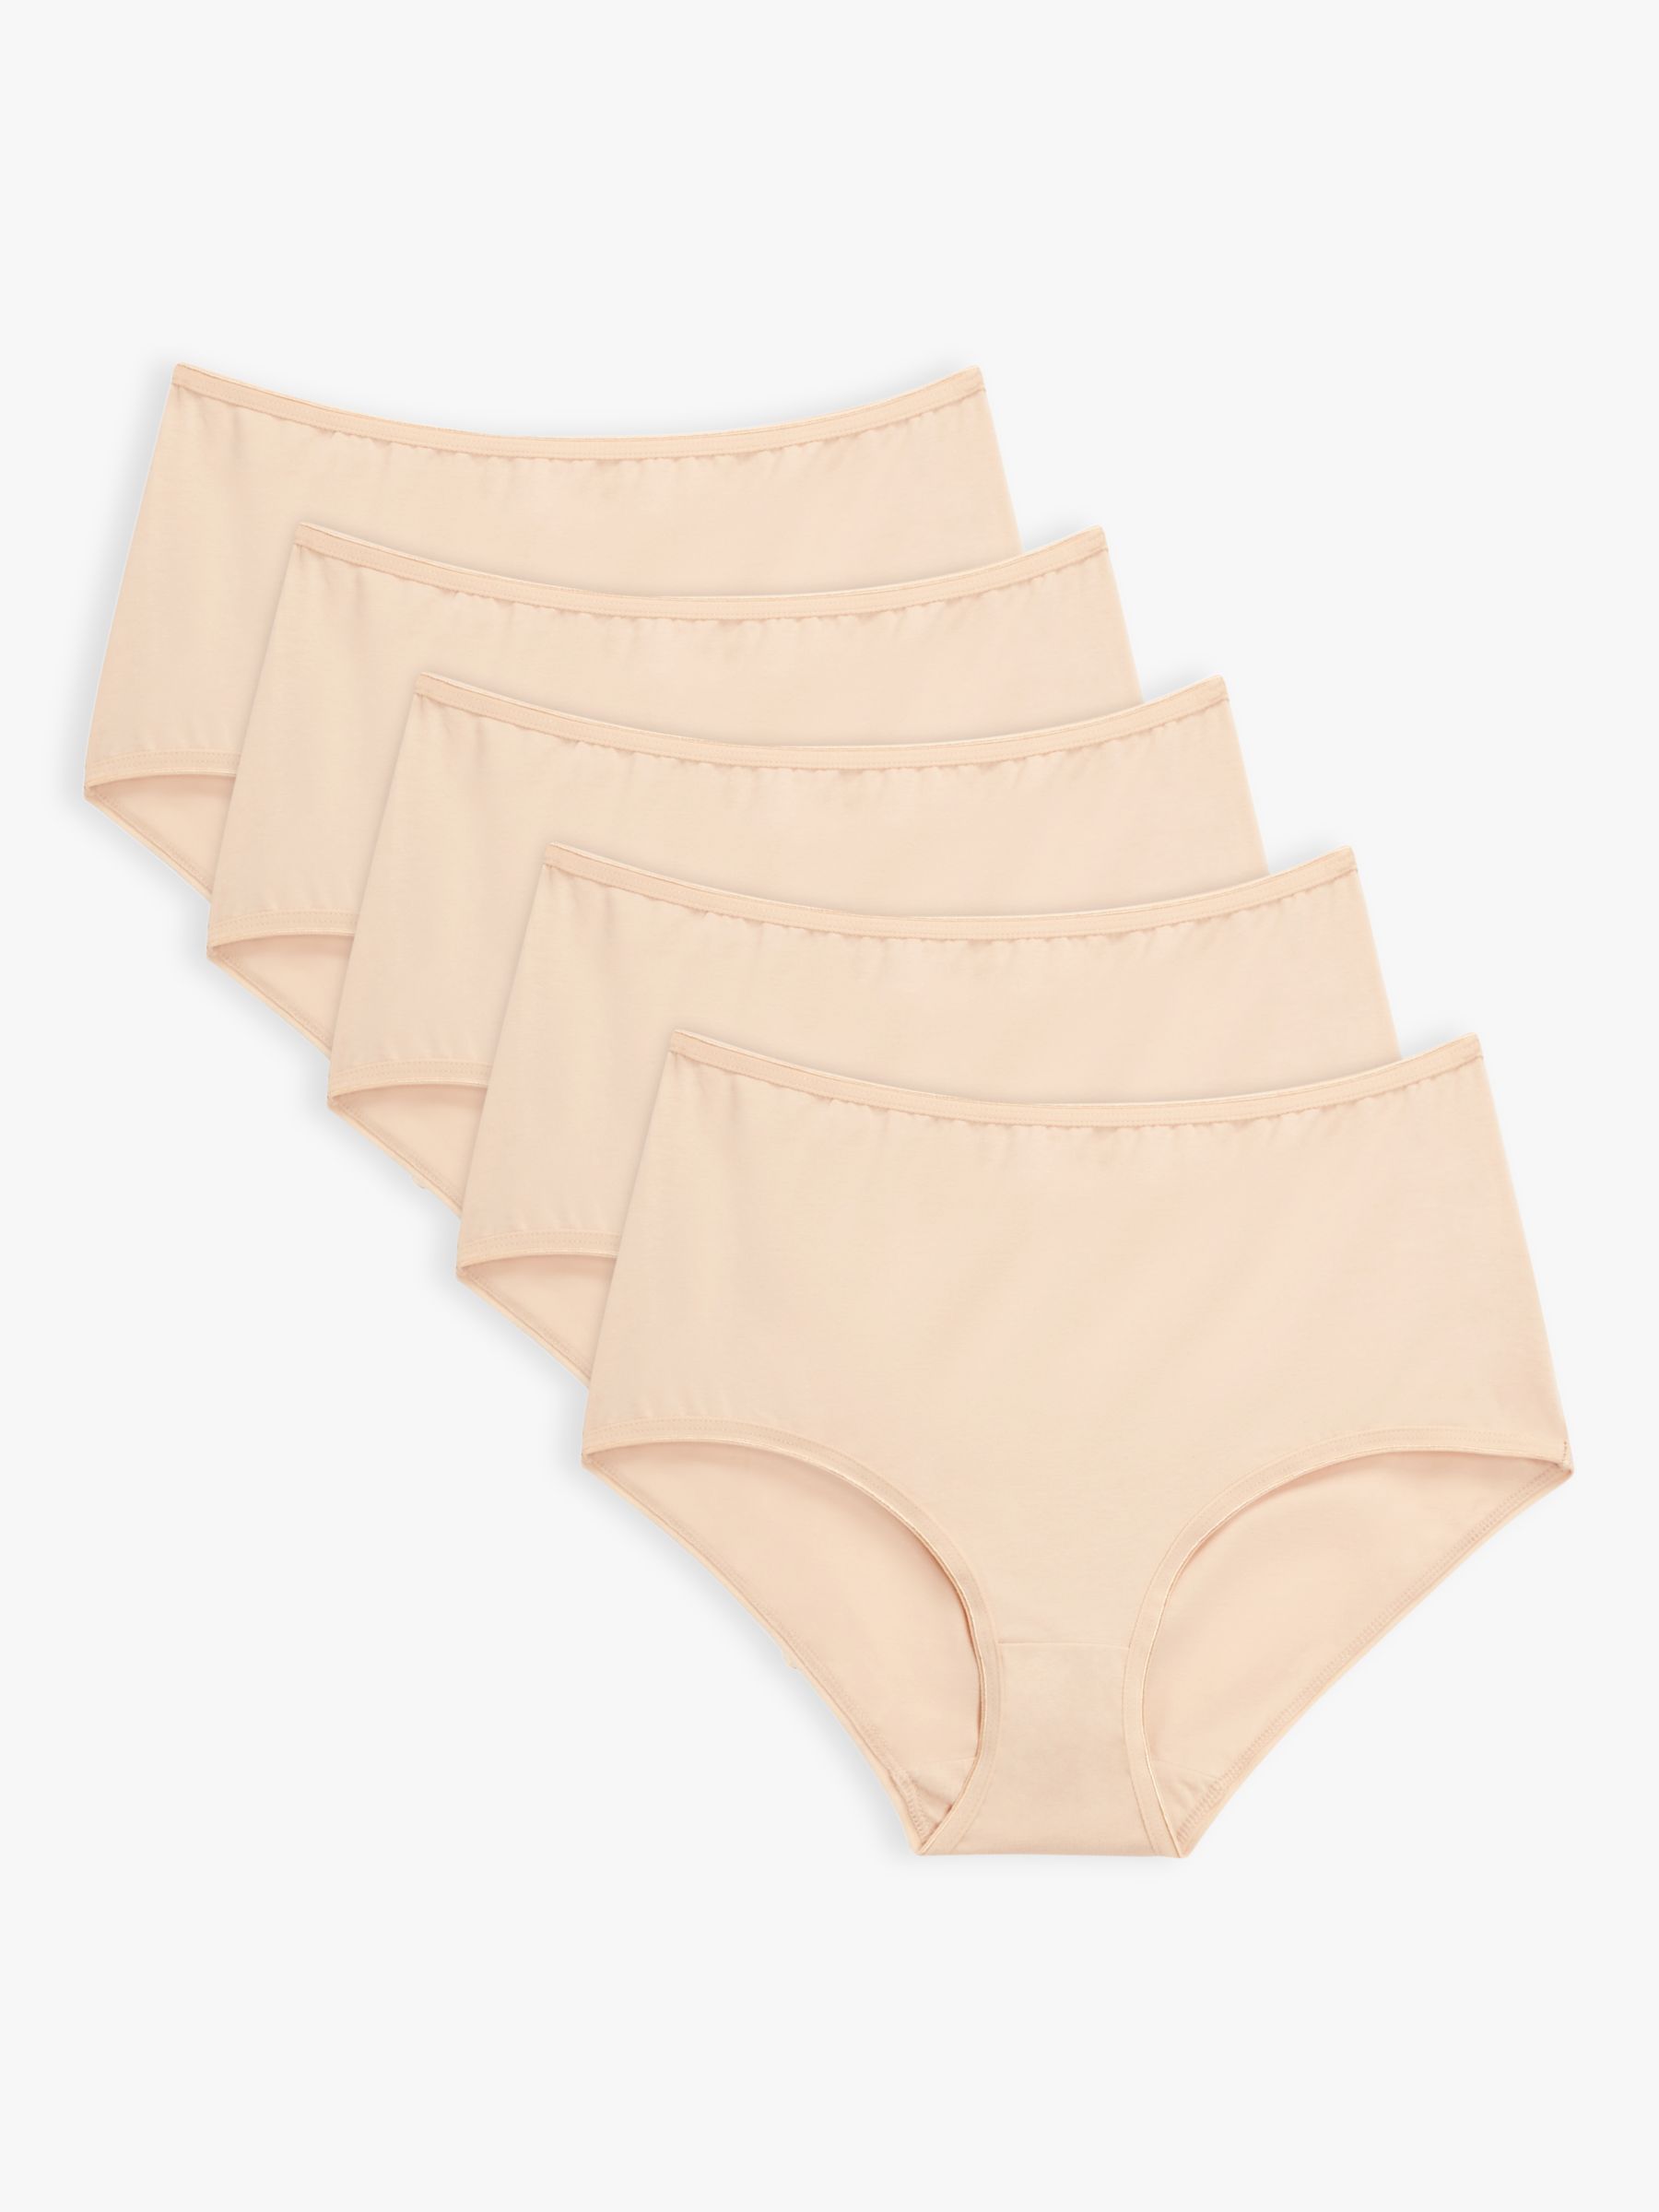 John Lewis ANYDAY Cotton Full Briefs, Pack of 5, Almond, 10